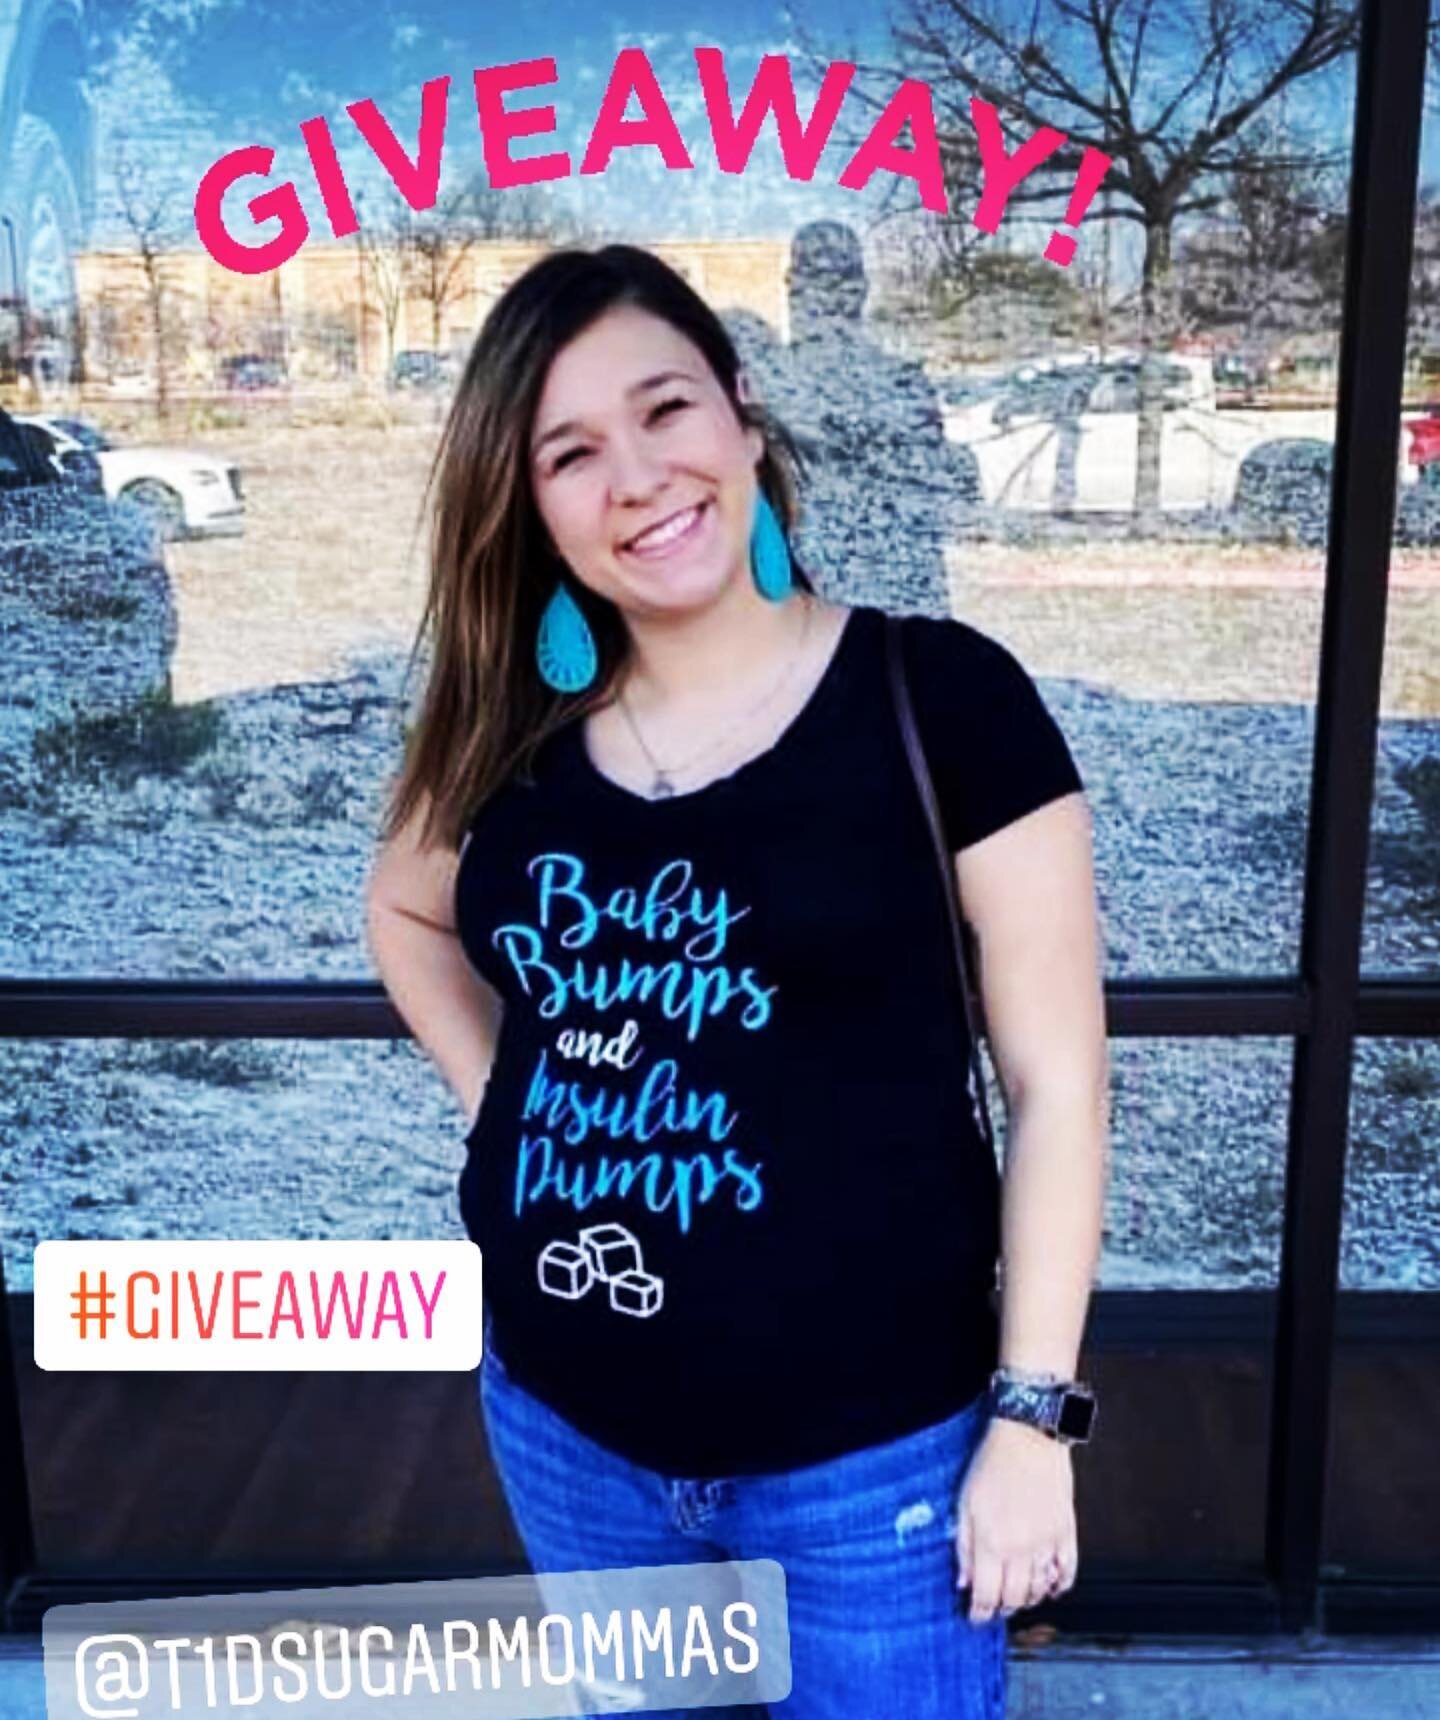 It&rsquo;s GIVEAWAY Time!

This is our 1st T1D Sugar Momma Giveaway and we are SO excited!! We are giving away a &ldquo;Baby Bumps and Insulin Pumps&rdquo; Maternity shirt! (Don&rsquo;t worry, you don&rsquo;t have be pregnant to win or wear it!) It&r